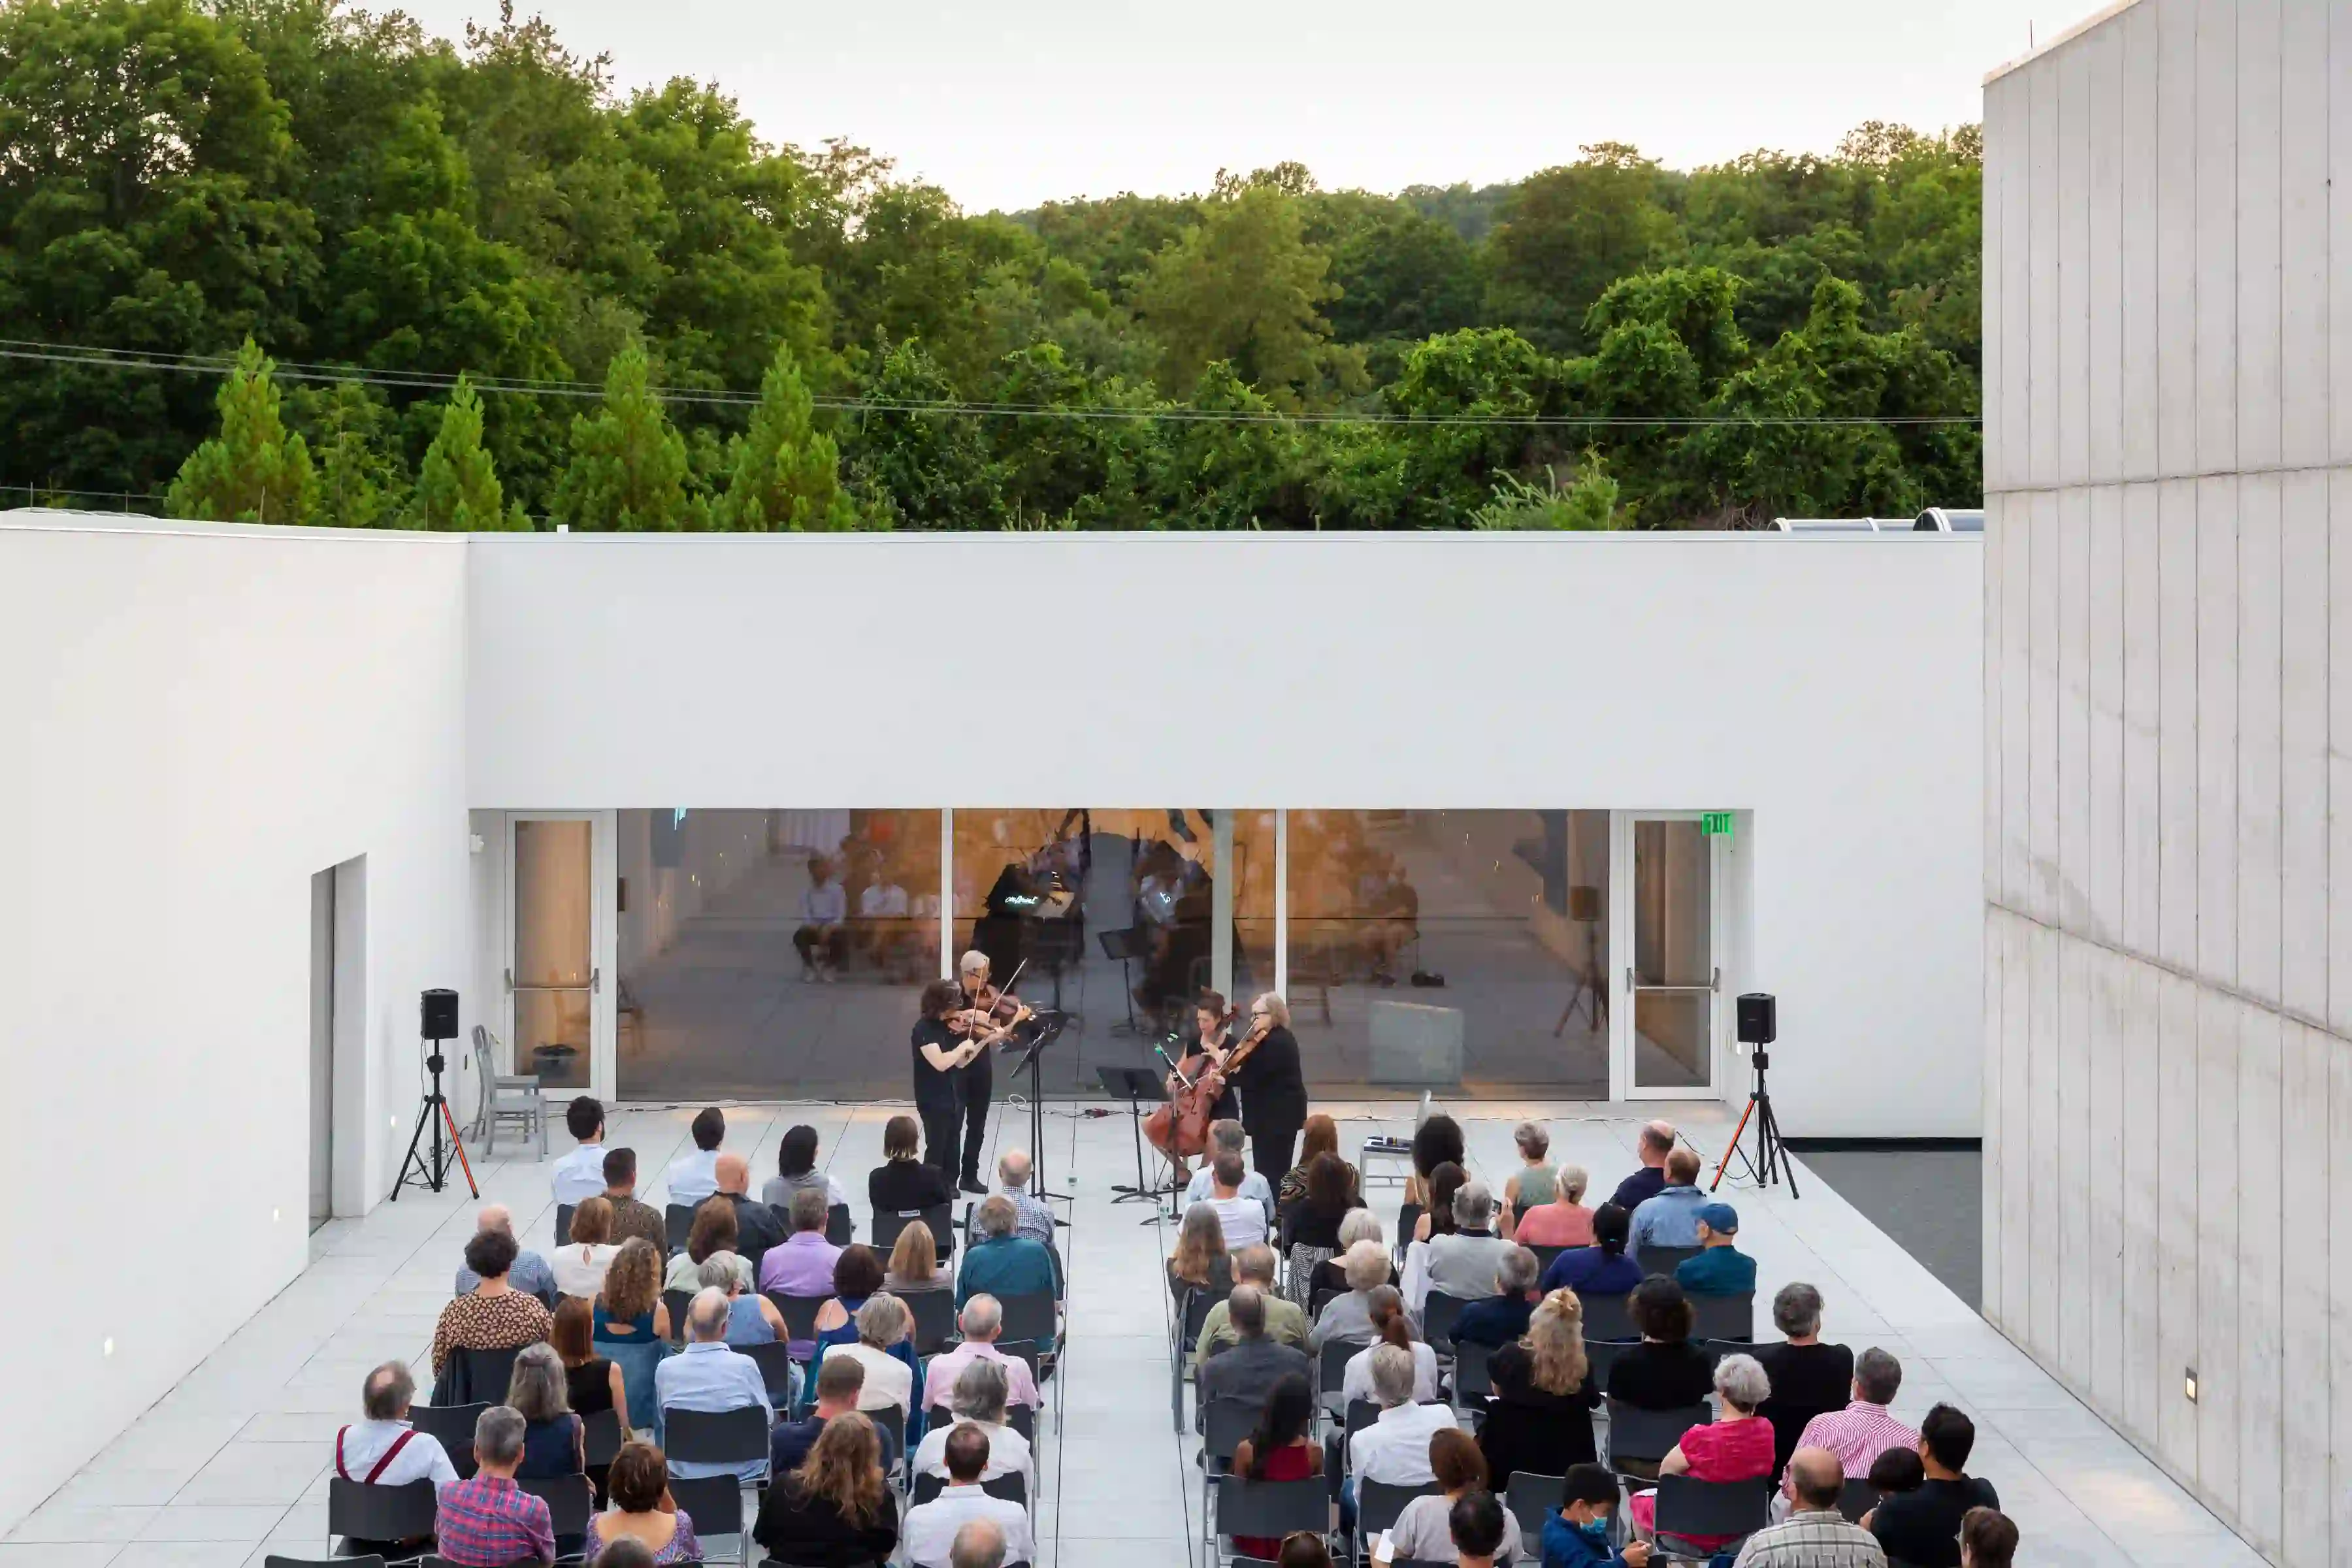 Attendees at the Italian Expressiveness and Expressionists concert at Magazzino Italian Art, June 10, 2021